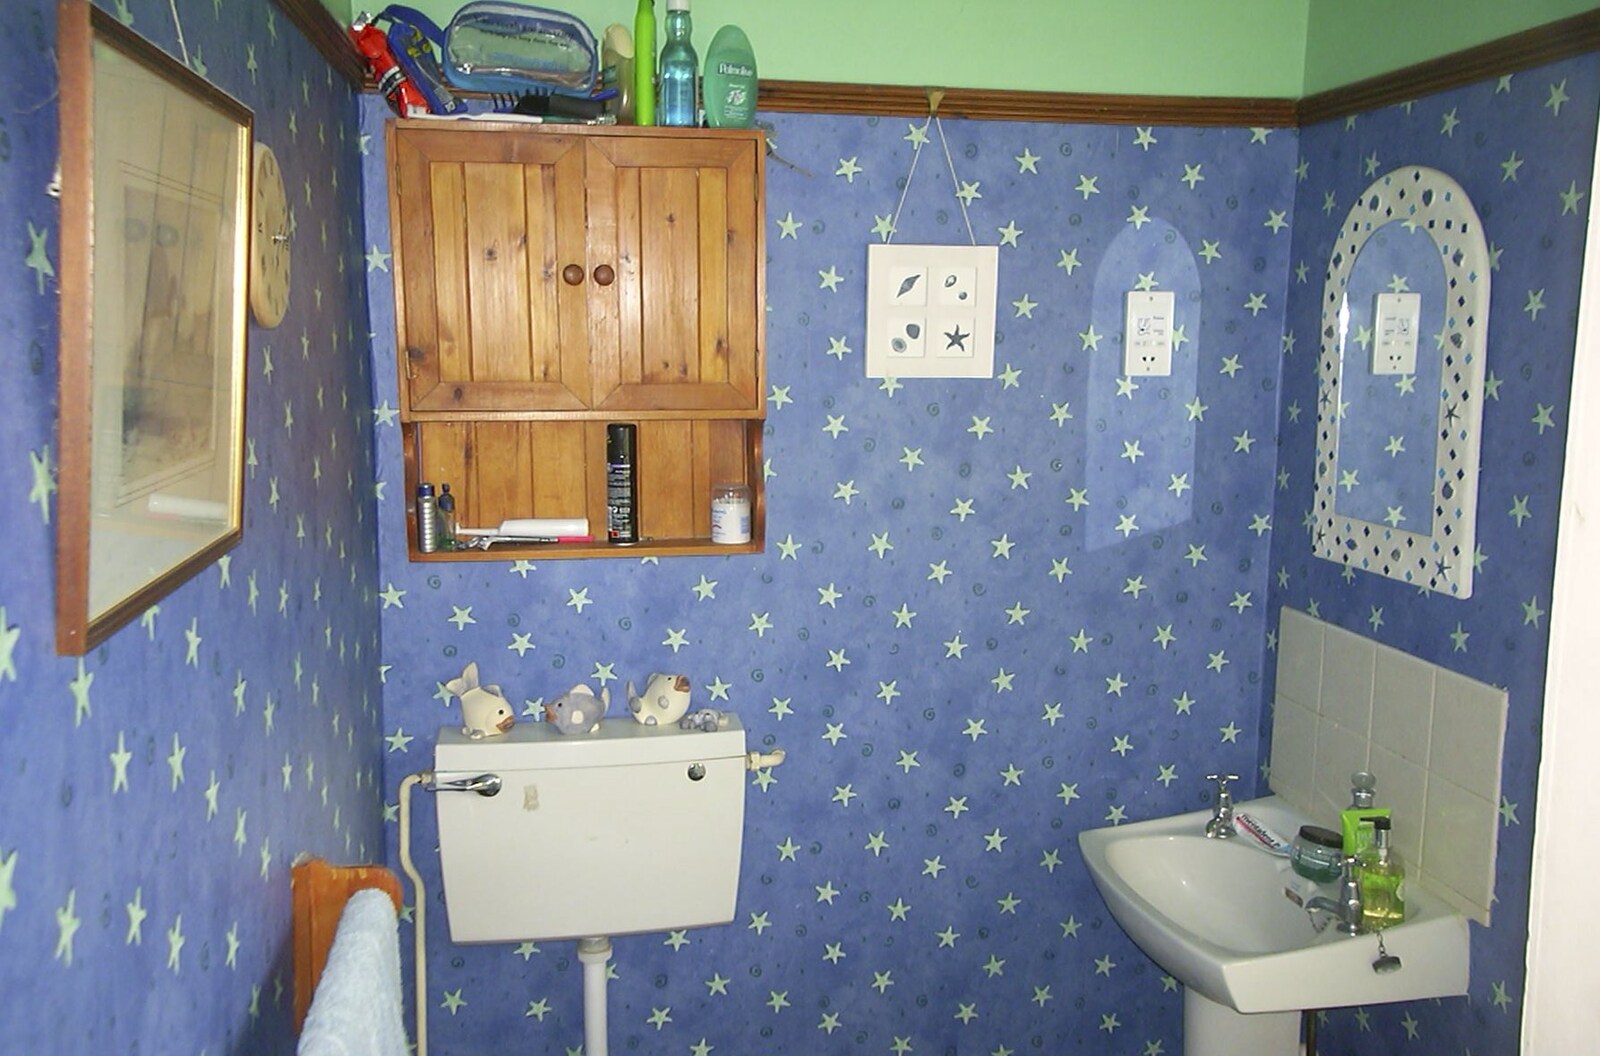 The bathroom is all full of stars from June Randomness, Brome, Suffolk - 15th June 2001